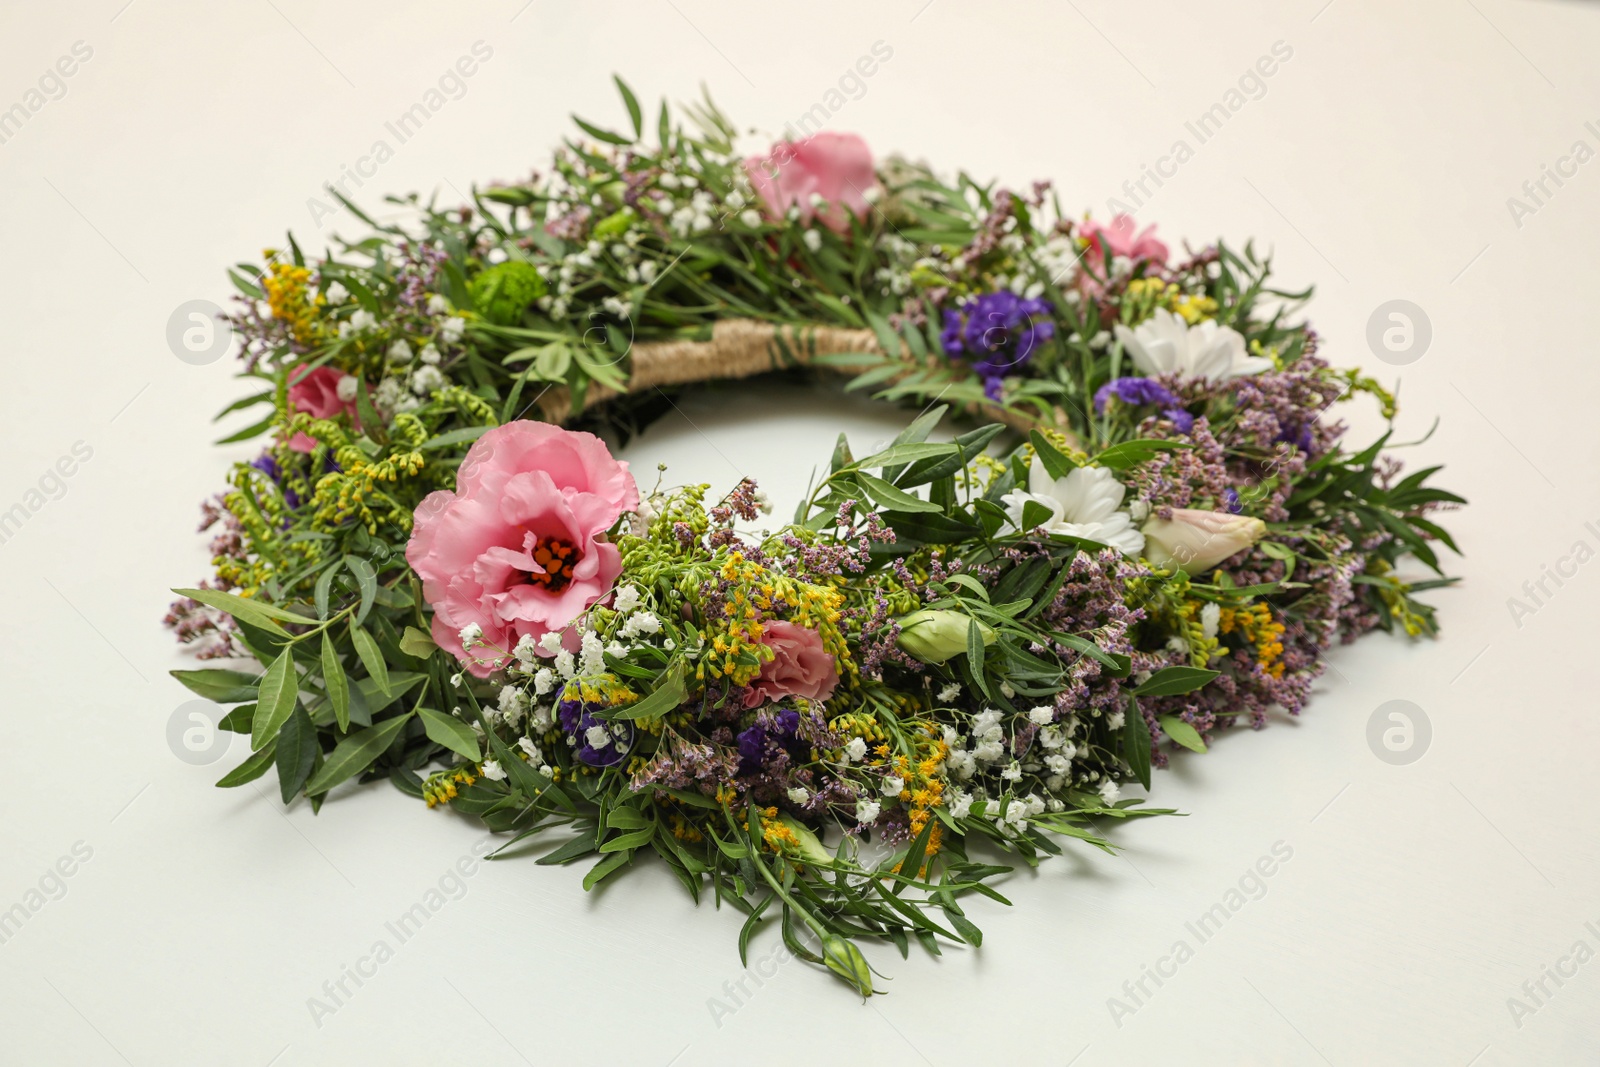 Photo of Wreath made of beautiful flowers on white background